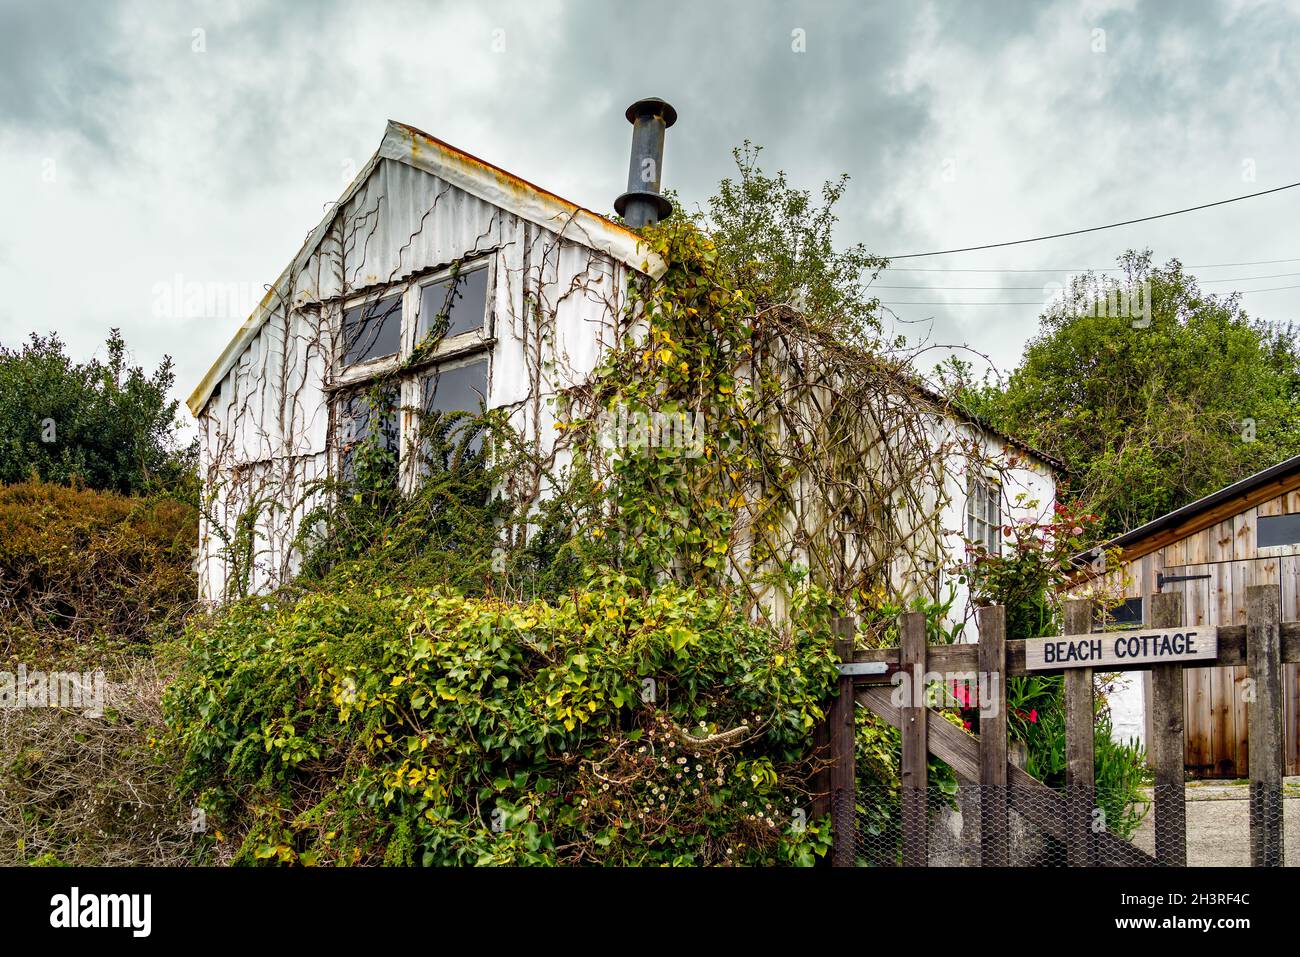 COOMBE, CORNWALL, UK - MAY 12 : Beach Cottage in Coombe, Cornwall on May 12, 2021 Stock Photo